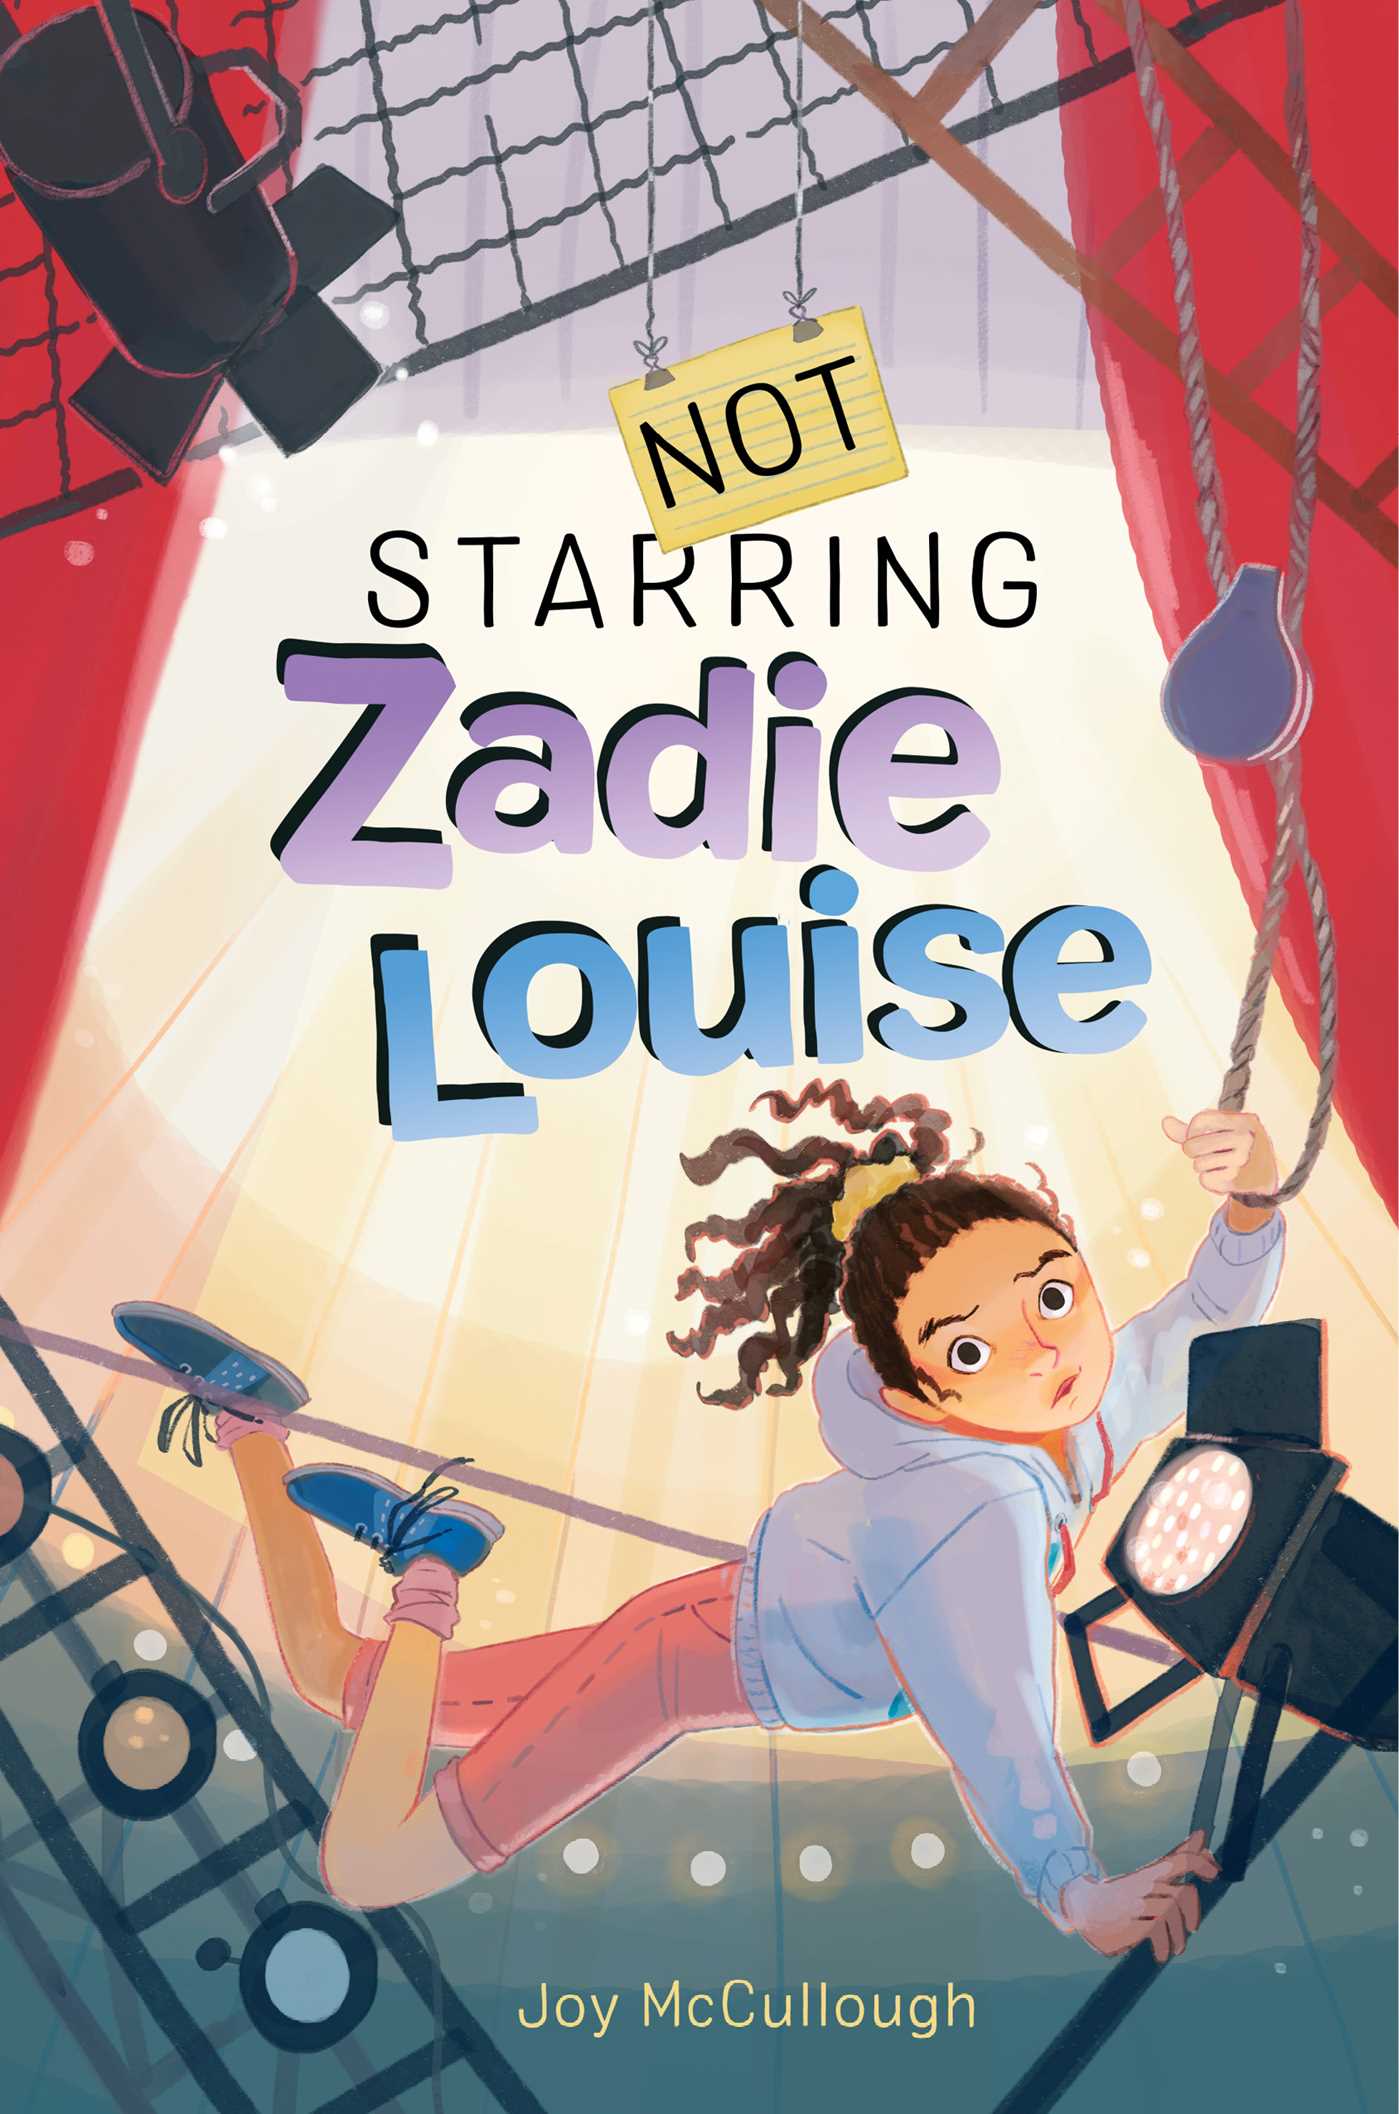 Image for "Not Starring Zadie Louise"